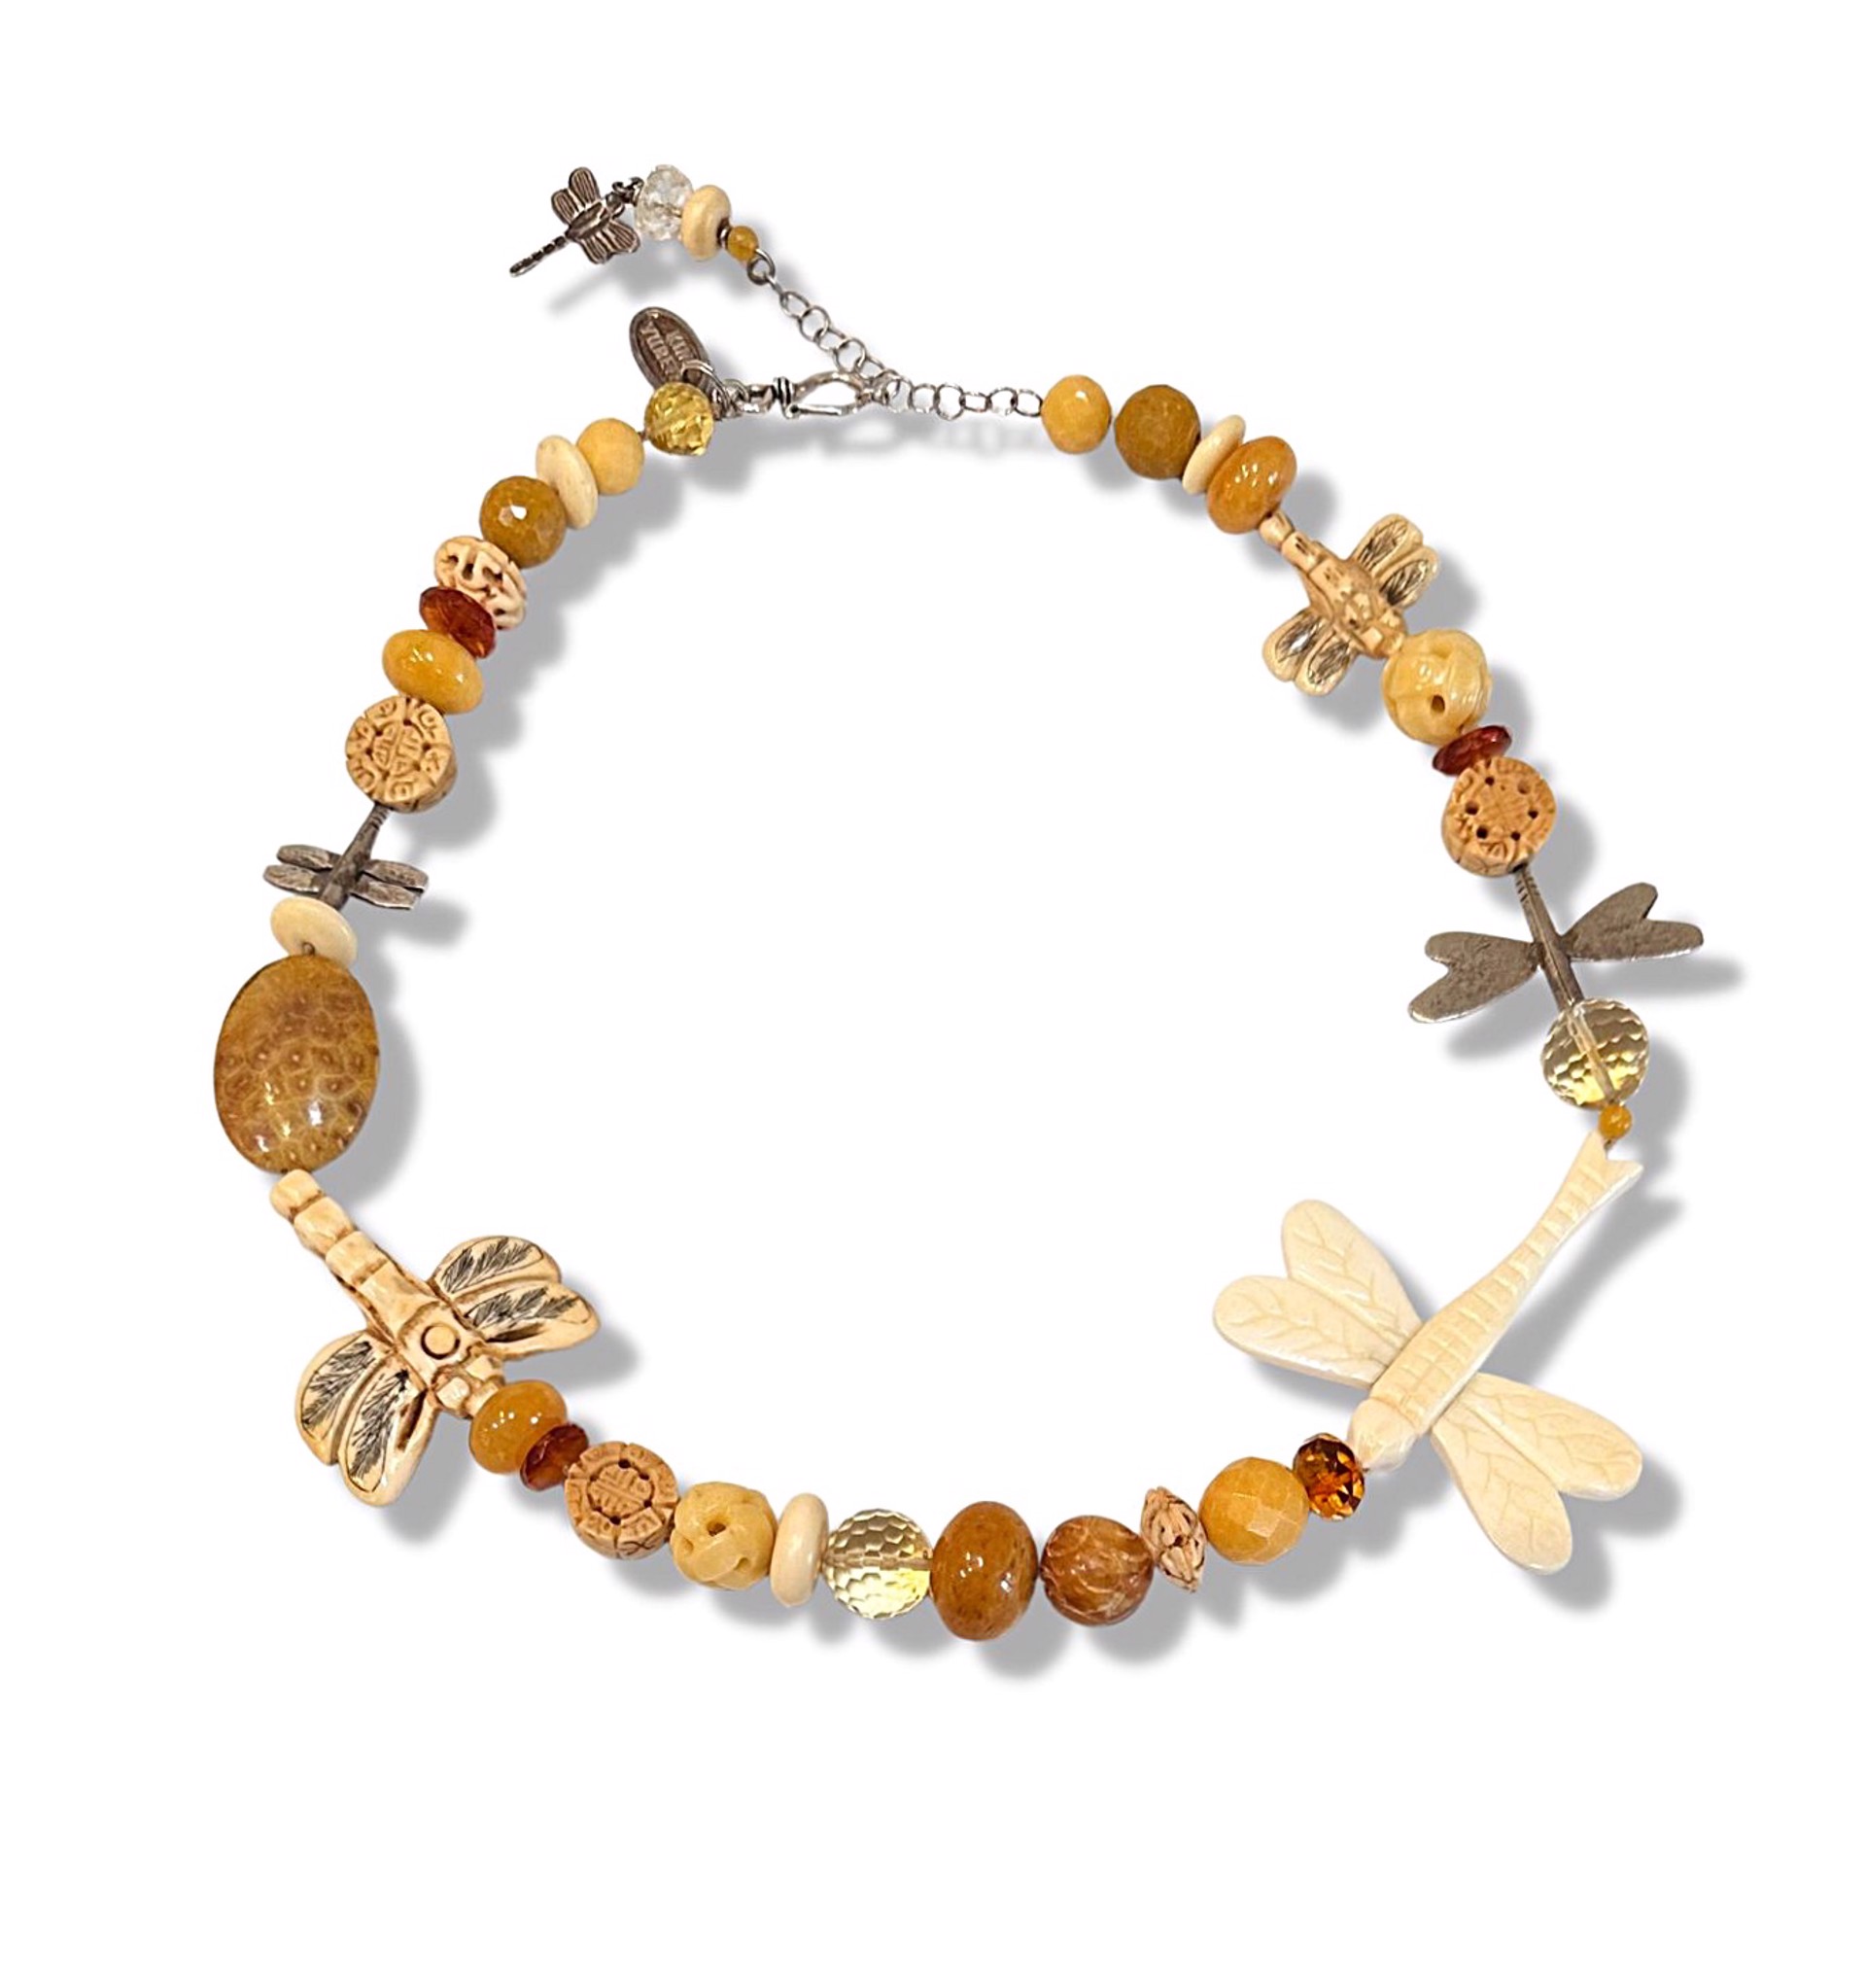 Necklace - Yellow Agate & Jade Beads with Carved Bone Dragonfly #25 by Kim Yubeta